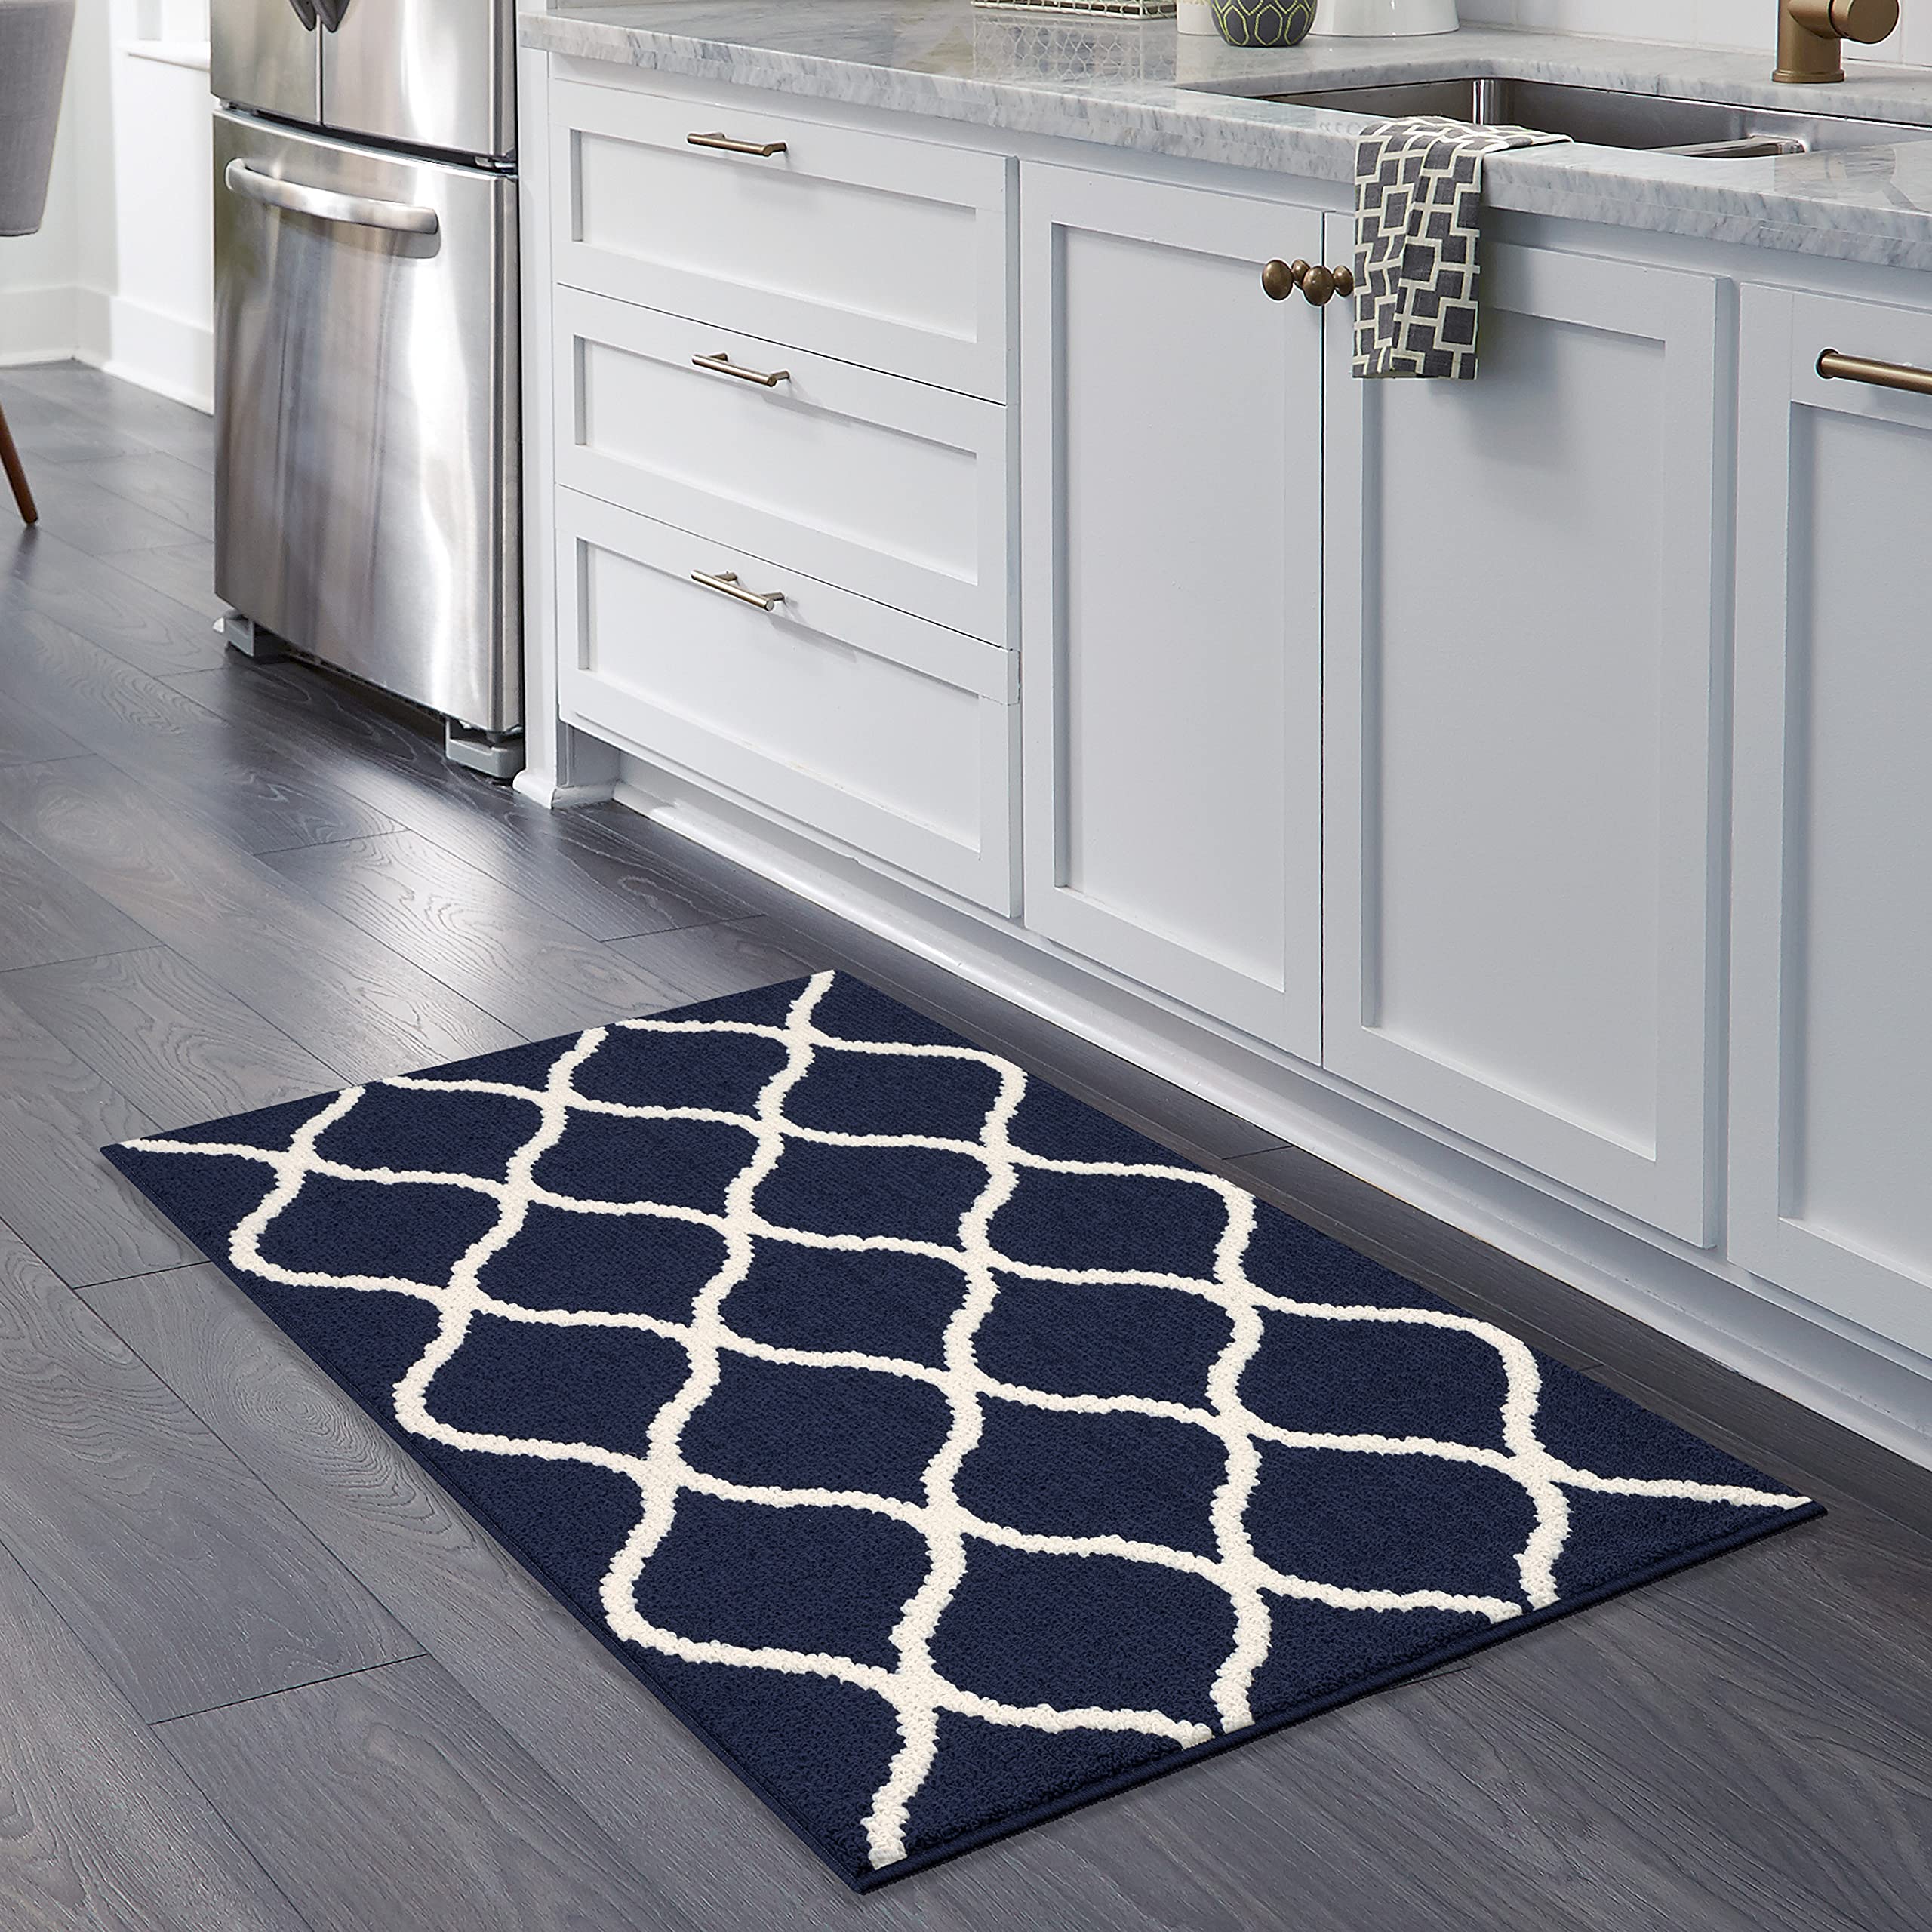 Book Cover Maples Rugs Rebecca Contemporary Kitchen Rugs Non Skid Accent Area Carpet [Made in USA], 2'6 x 3'10, Navy Blue/White Navy Blue/White 2'6